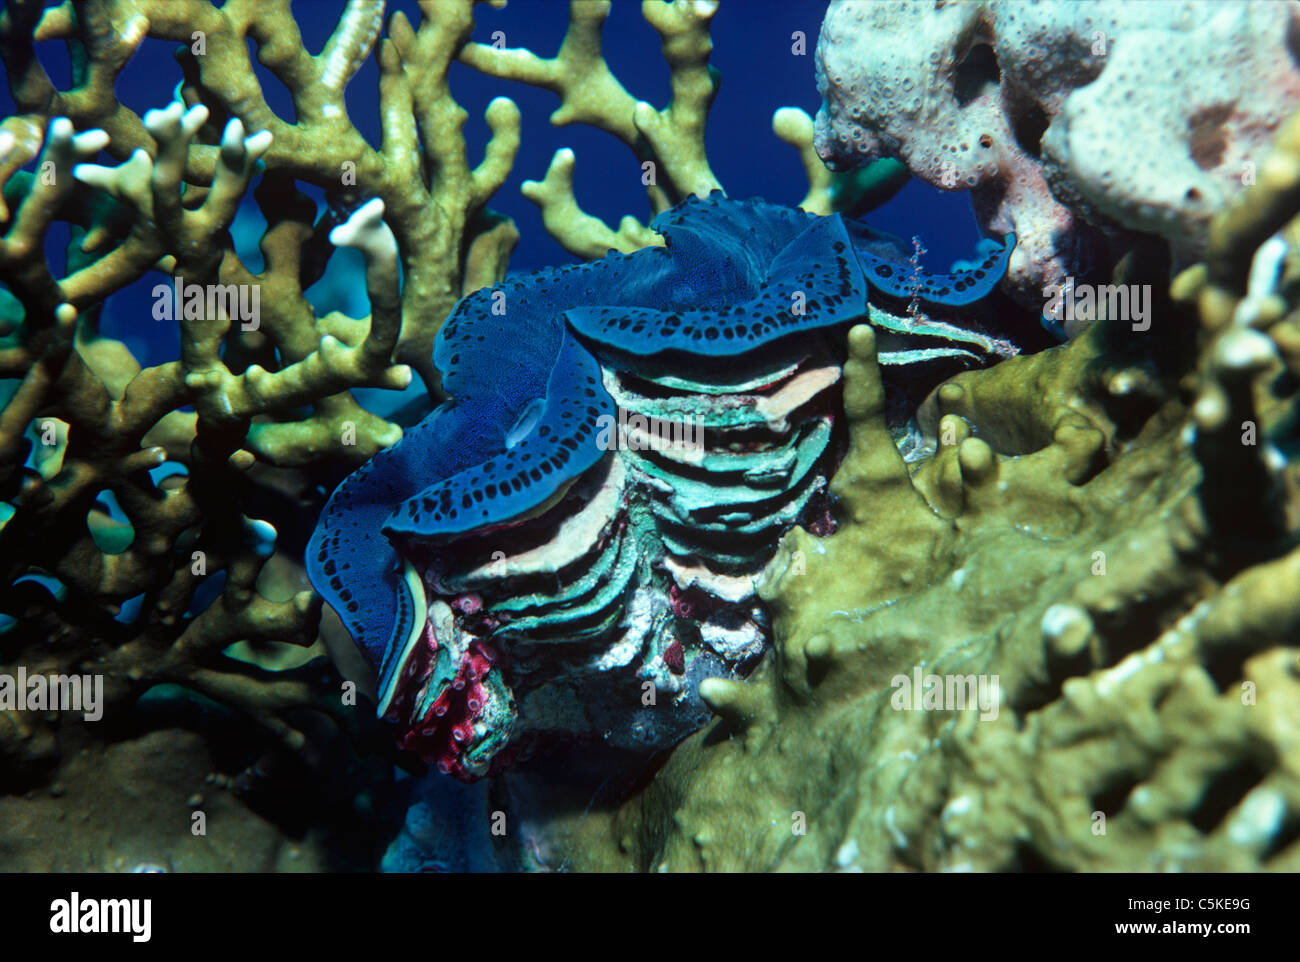 Giant Crocus Clam (Tridacna crocea) exposing mantle on Fire Coral (Millepora alcicornis). Egypt, Red Sea Stock Photo